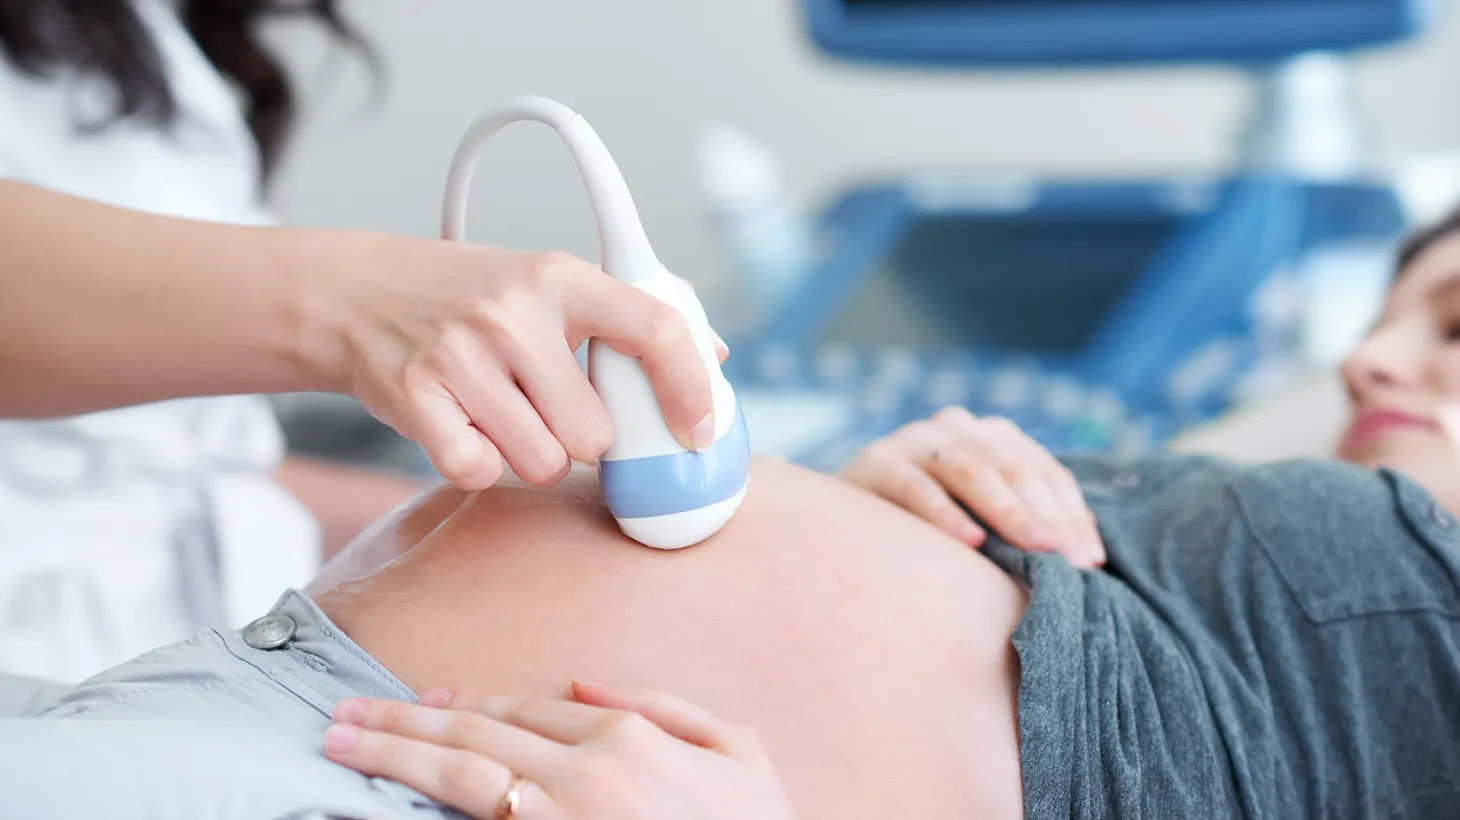 Pregnancy resource centers are typically unregulated and don’t provide formal medical care, says UCSF professor Katrina Kimport.